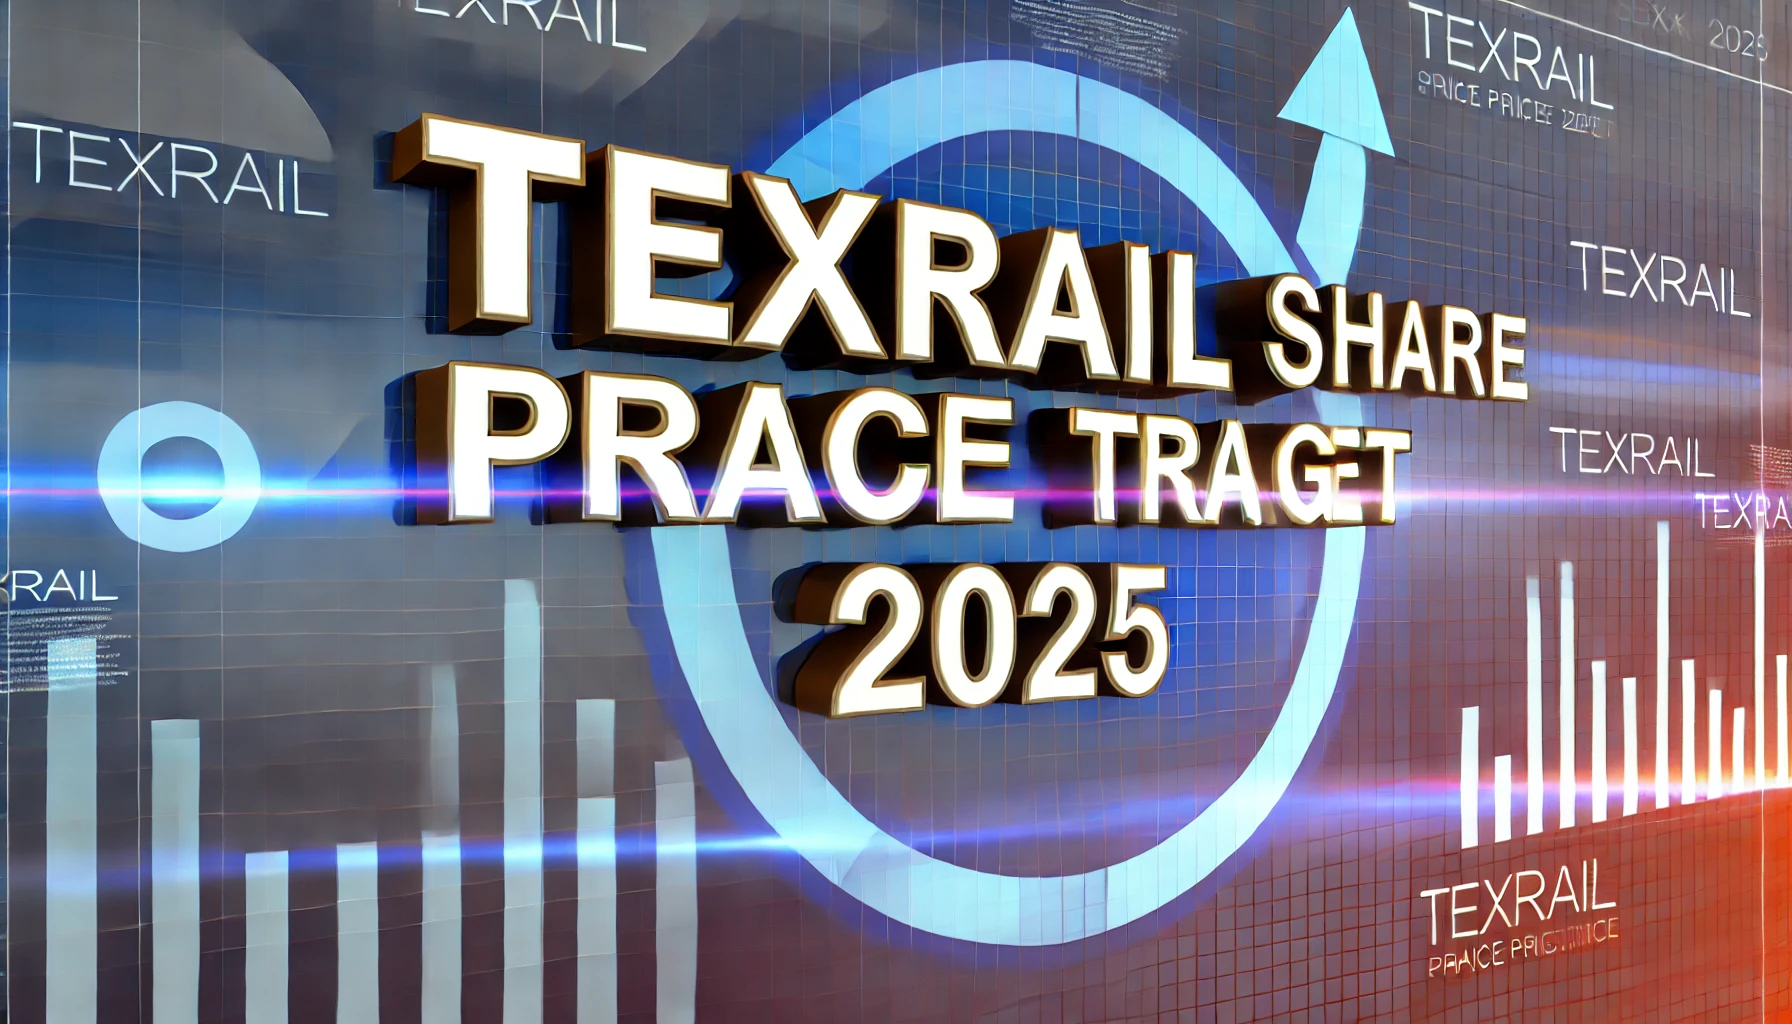 Texrail Share Price Target 2025